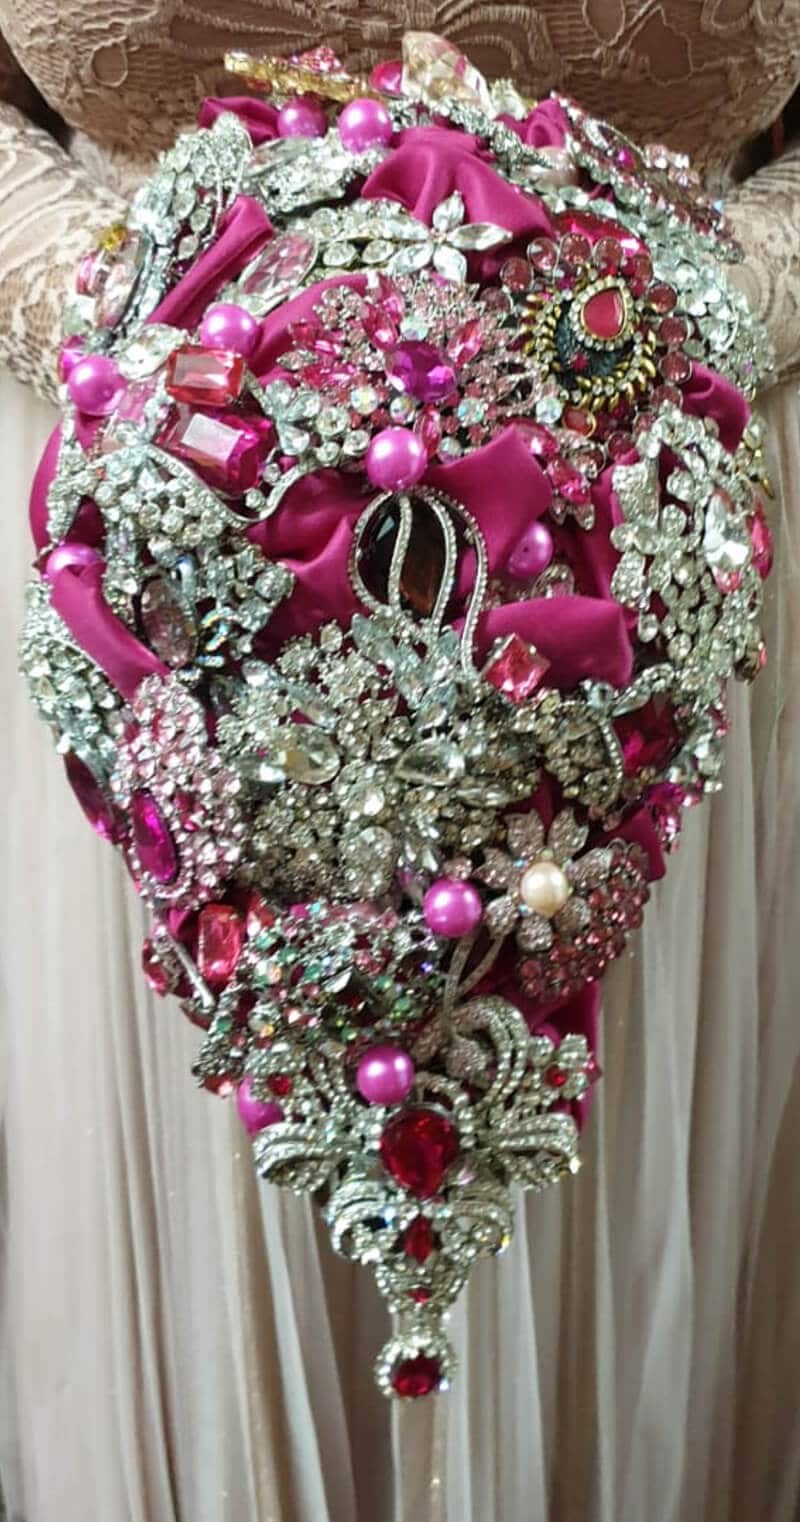 brooch bouquets